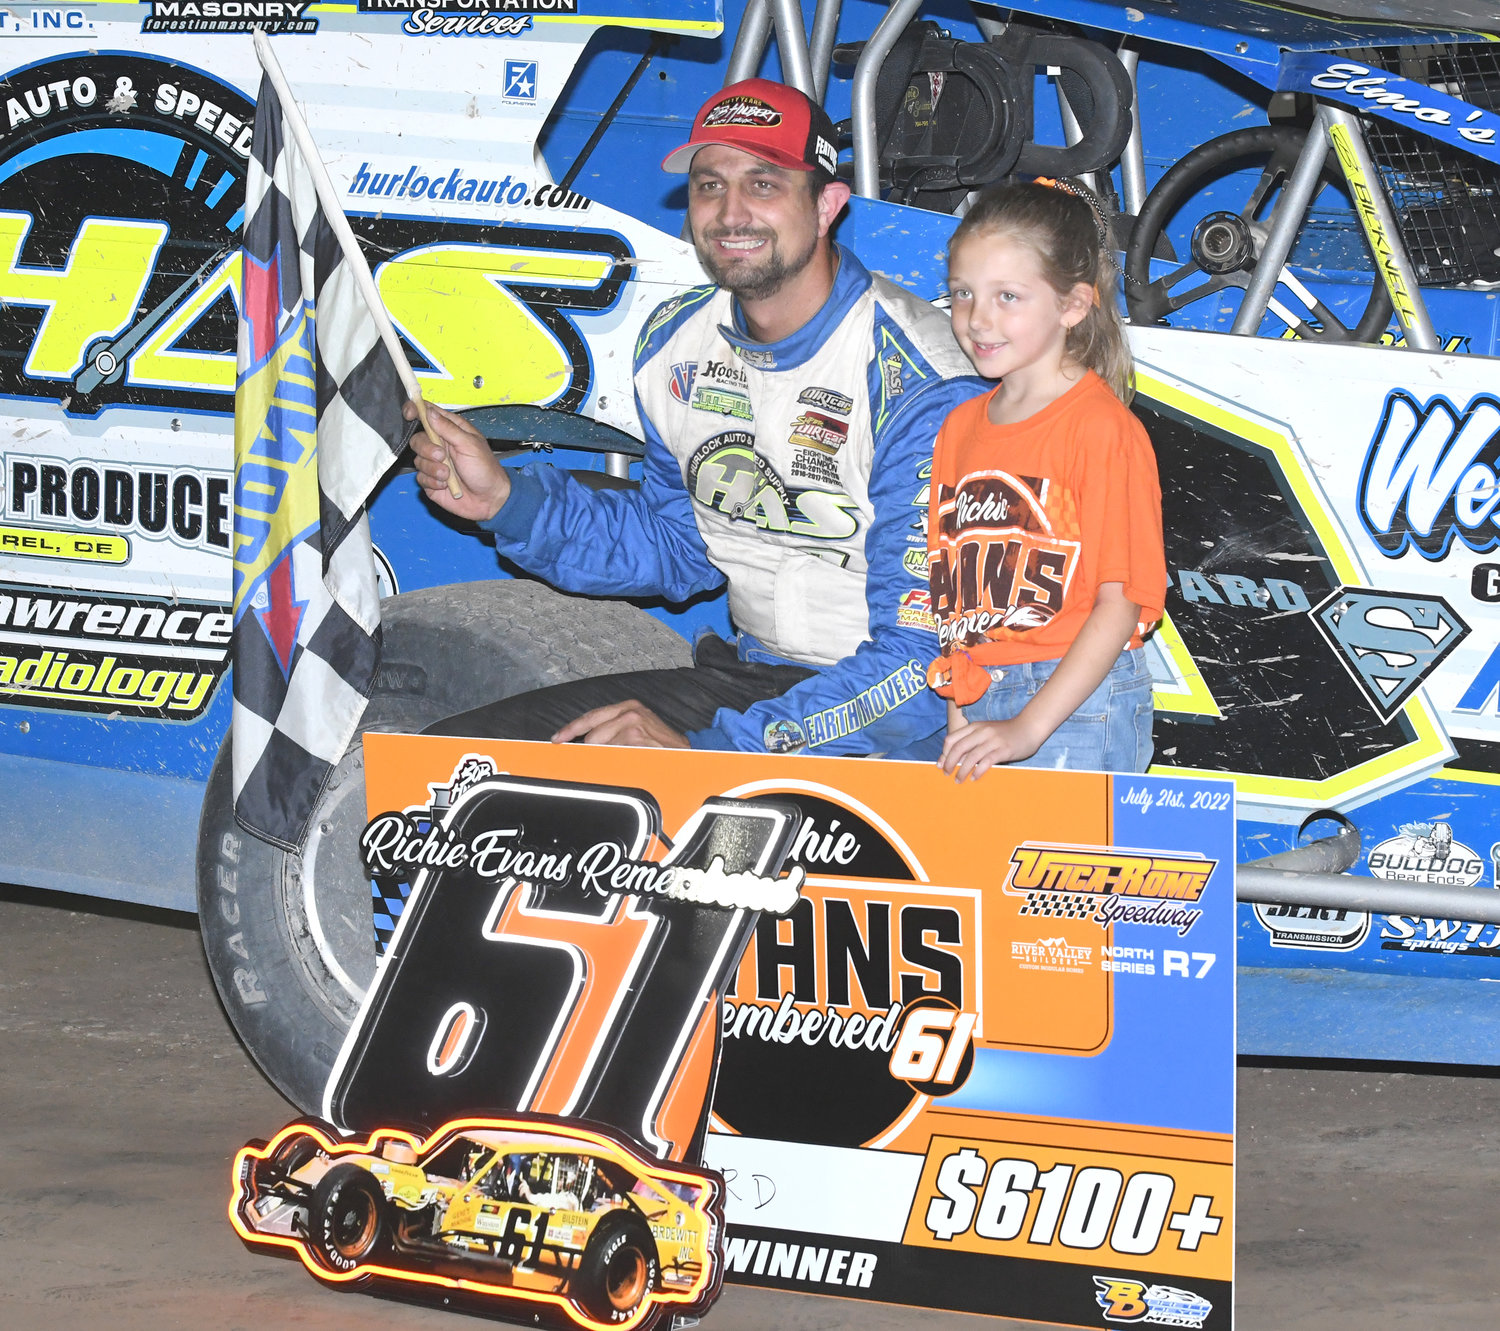 VICTORY LANE CELEBRATION — Matt Sheppard of Savannah celebrates with the great grand-daughter of Richie Evans, Grace Smith, 8, in victory lane Thursday night after winning the 61-lap Richie Evans Remembered feature race at Utica-Rome Speedway.